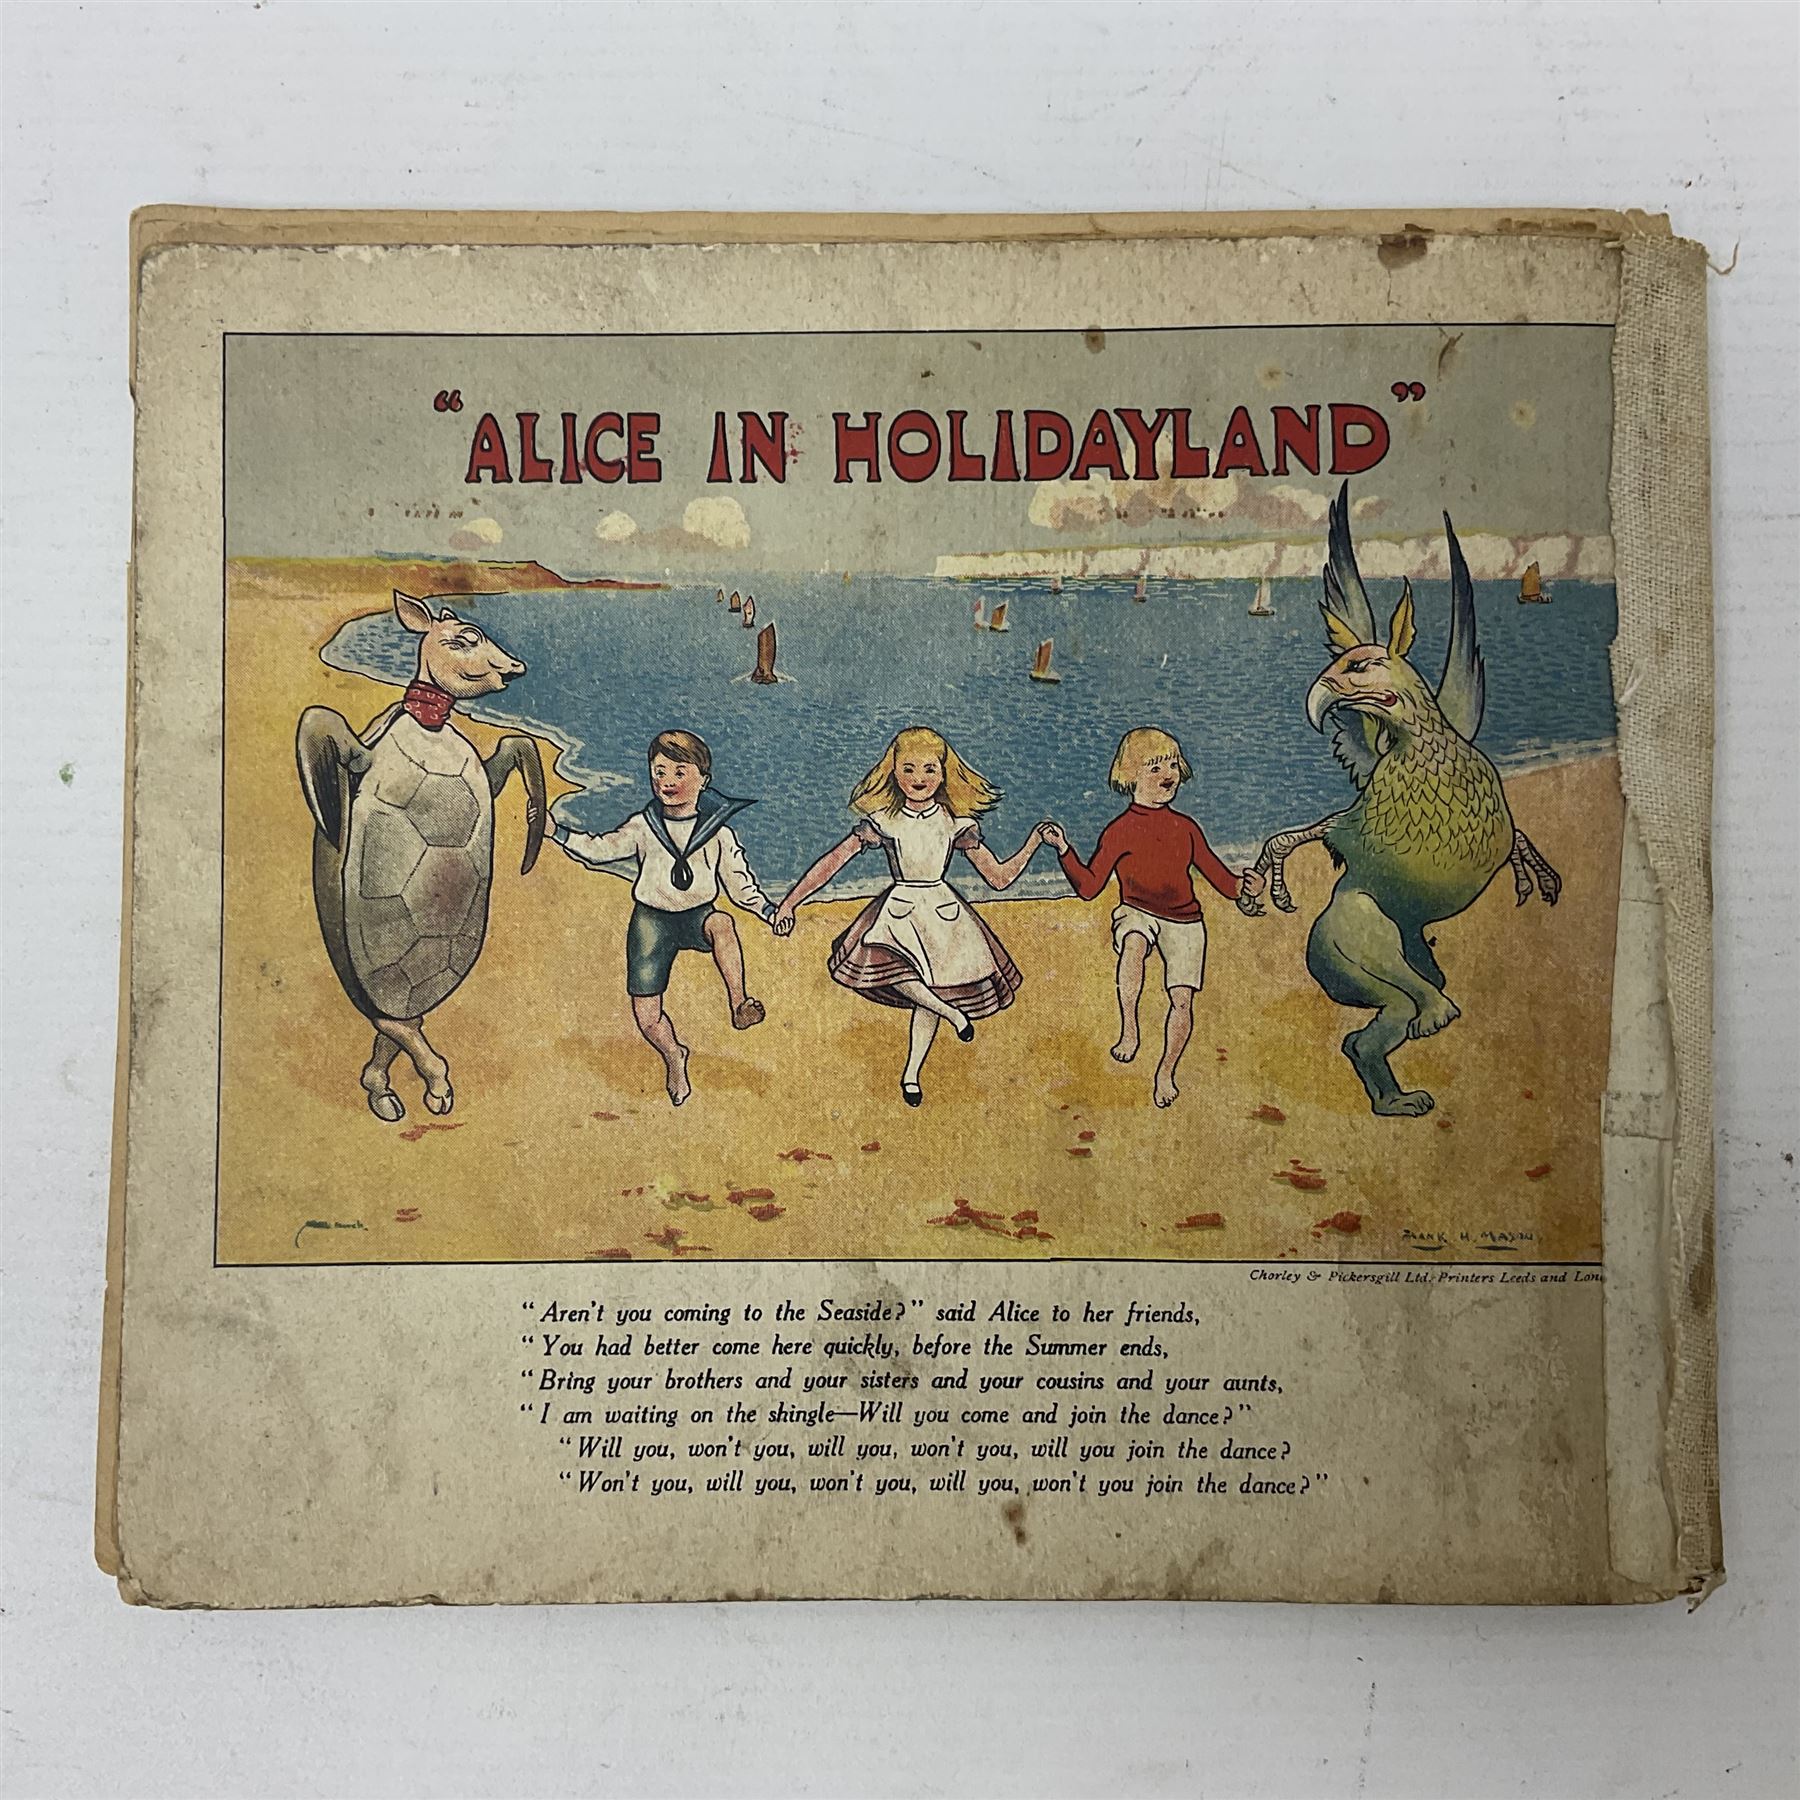 Frank Mason and Noel Pocock; Alice in Holidayland - A Parody in Prose - Image 11 of 12